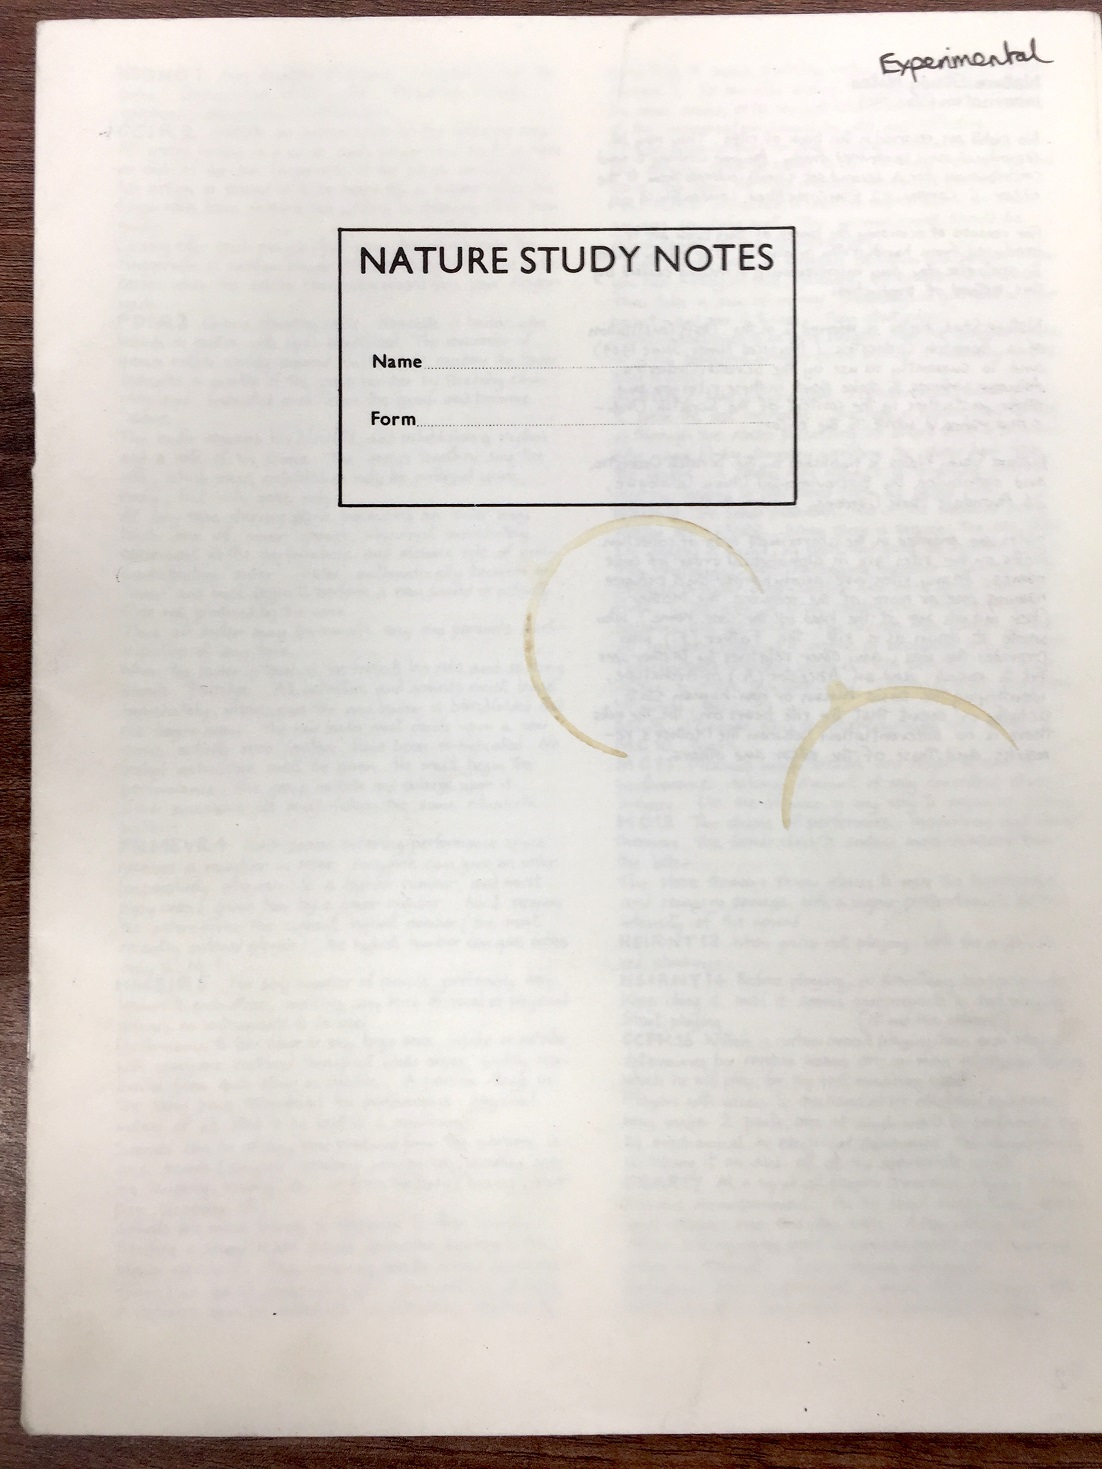 the cover page of "Nature Study Notes"